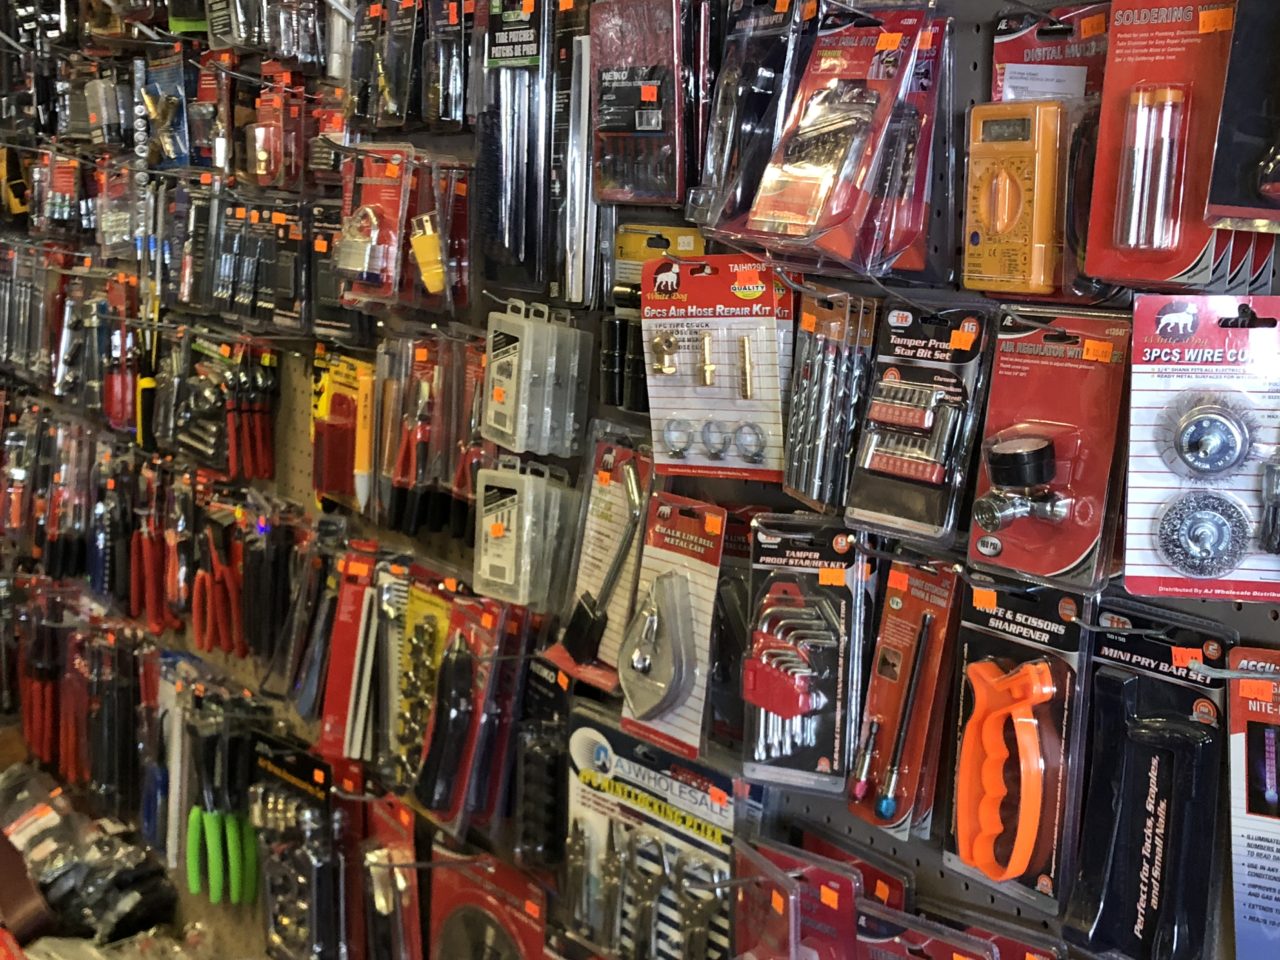 Victor's Tools, Toys & Boots